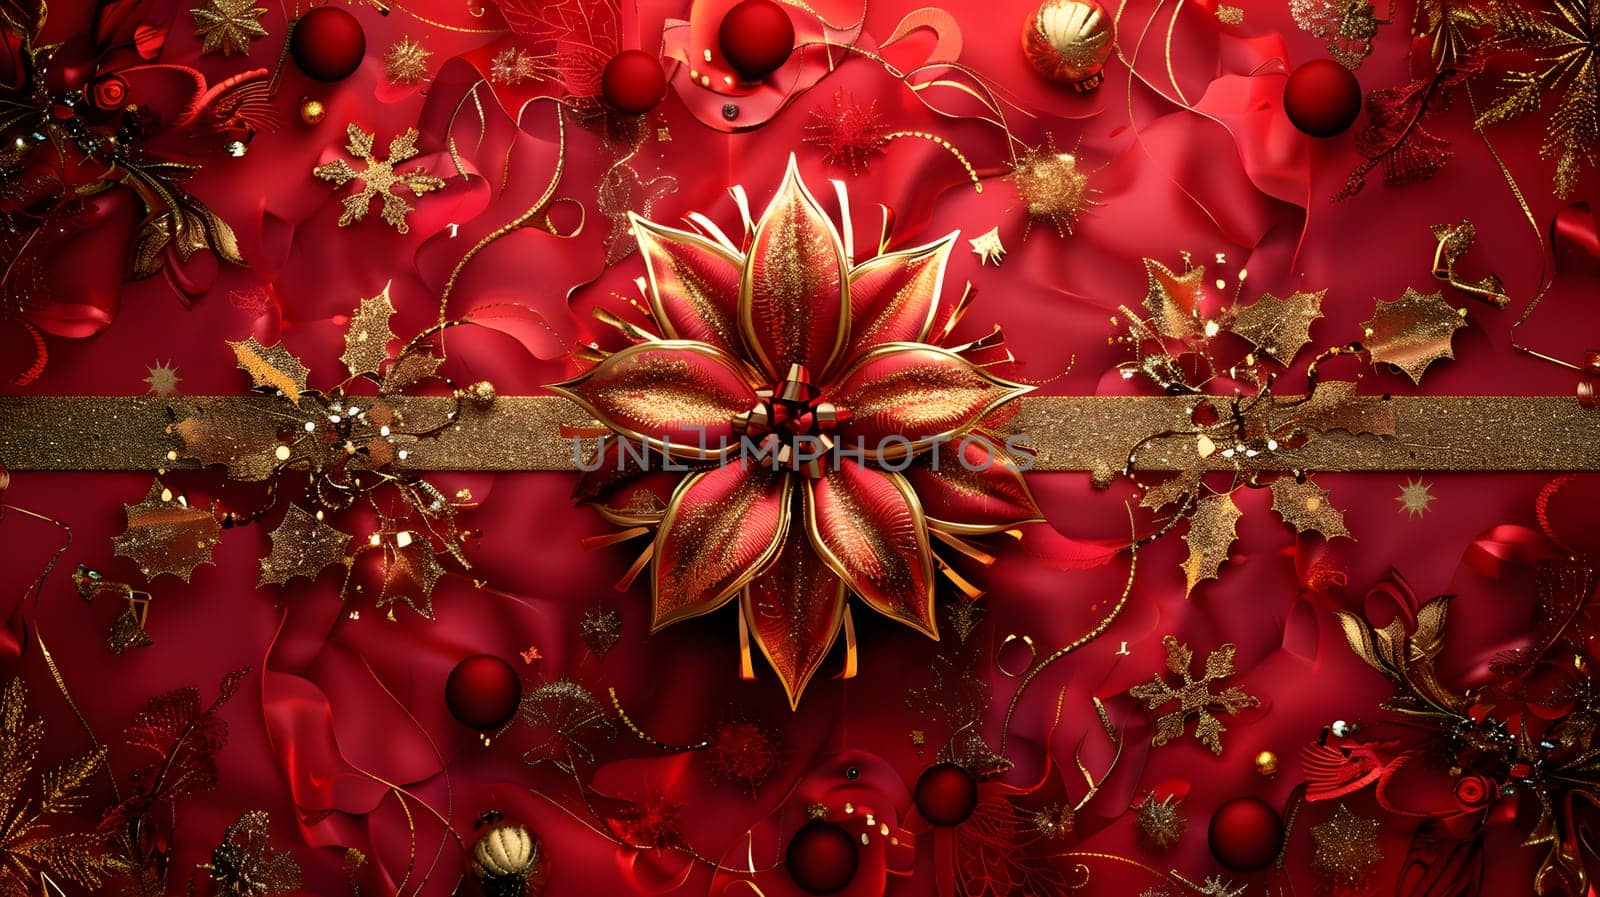 An elegant red and gold Christmas background adorned with a stunning poinsettia flower, a symbol of the holiday season. The perfect blend of art and nature for any festive event